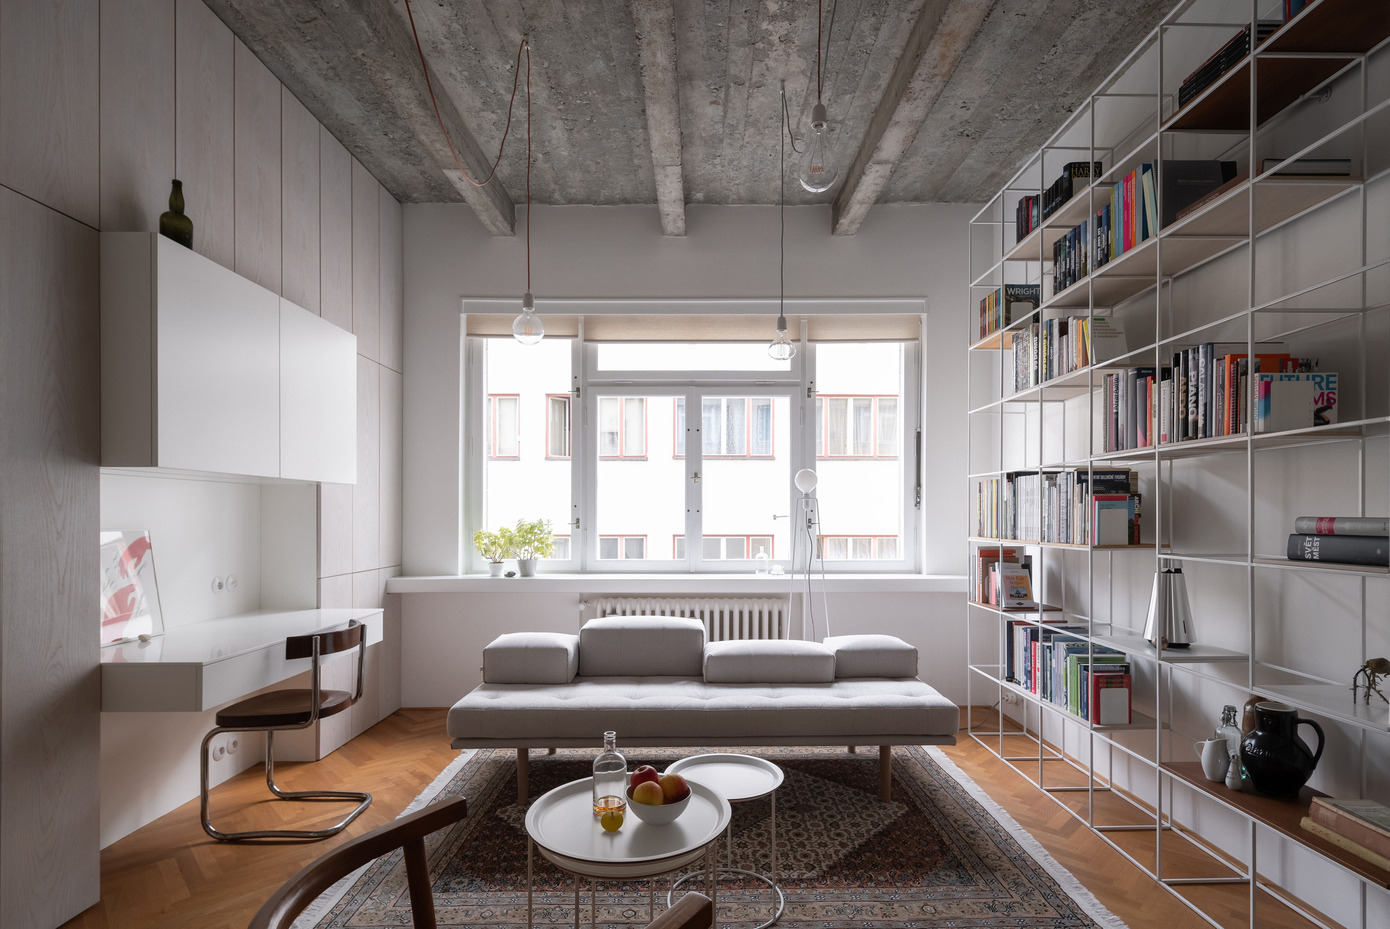 Functionalist Apartment: Merging 1930s Charm with Modern Design